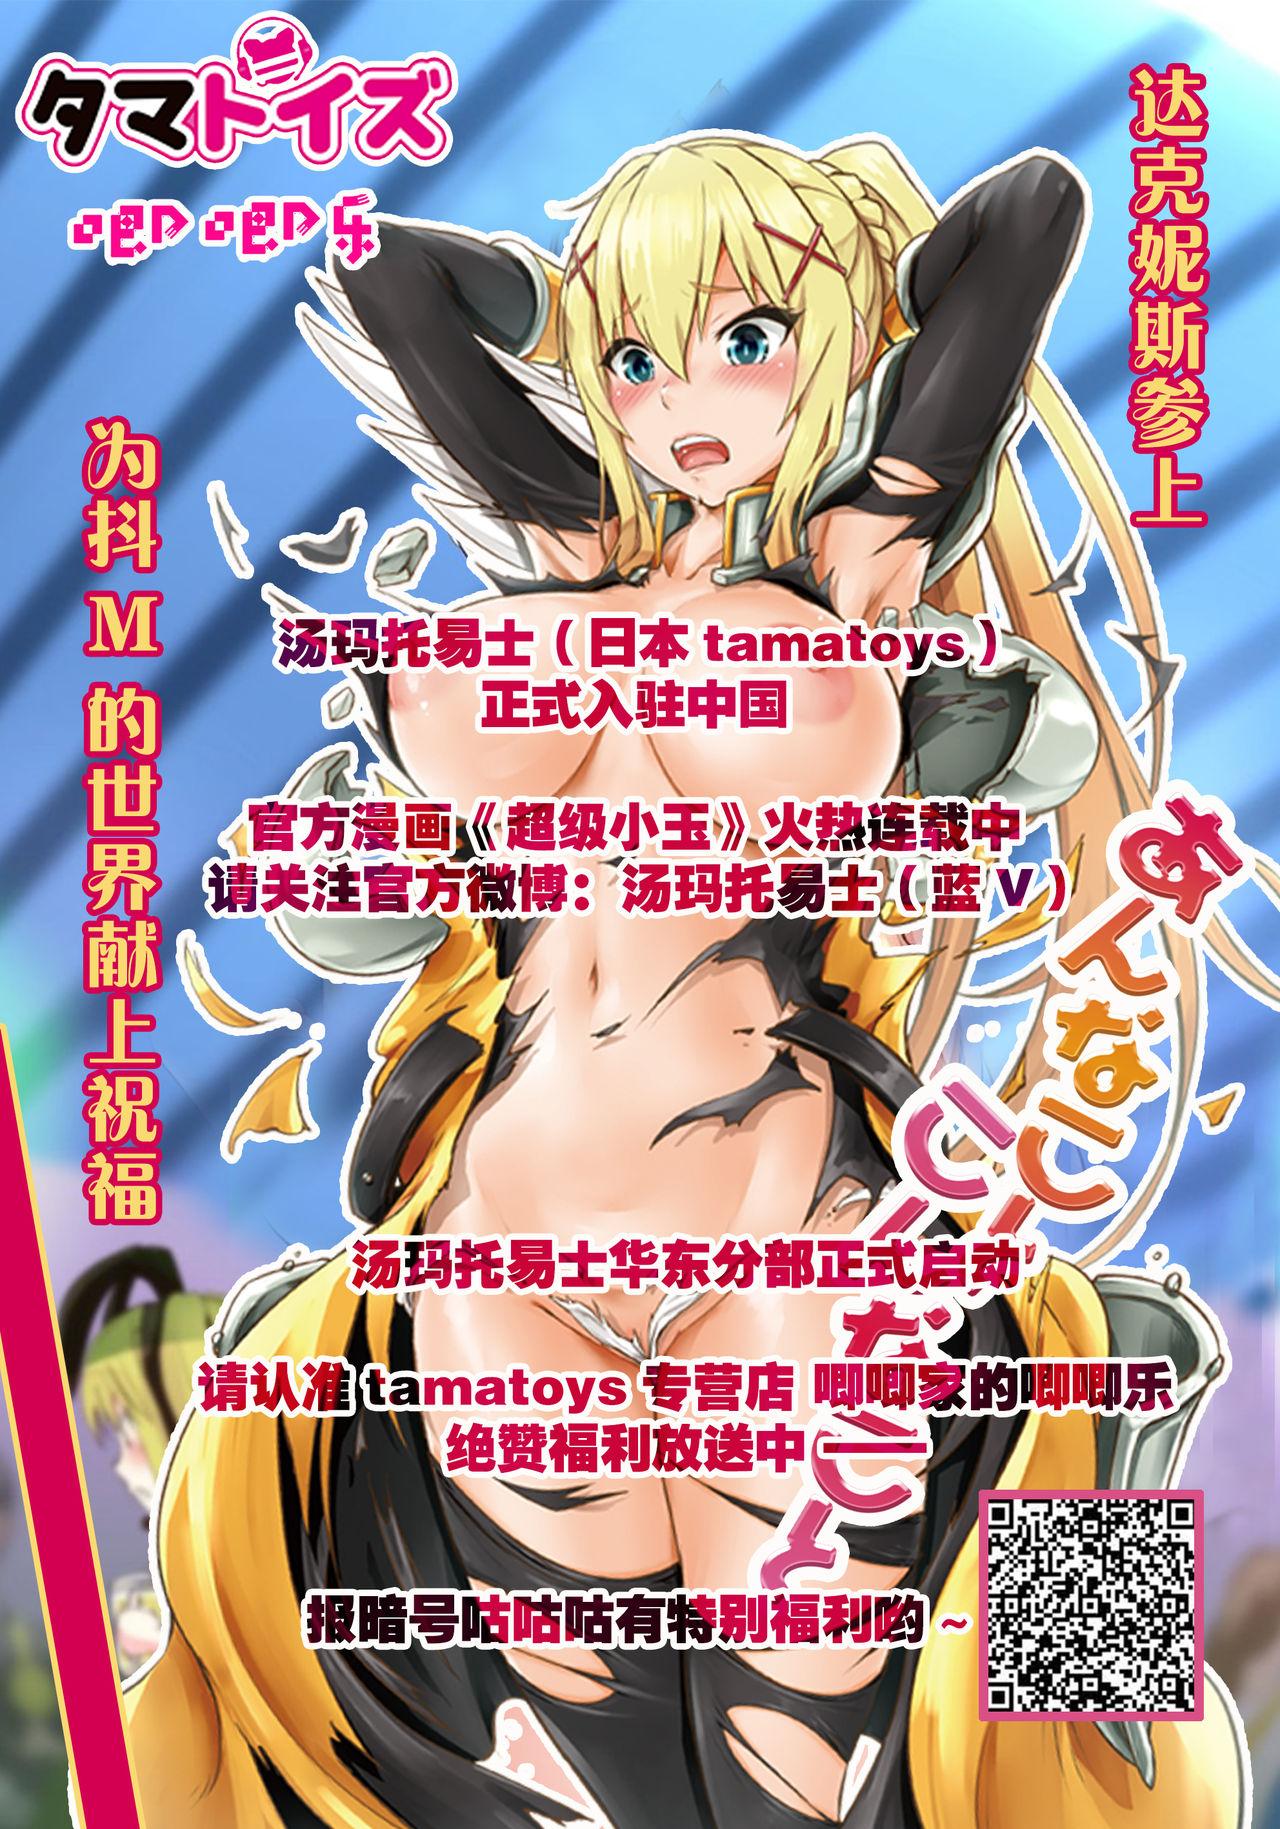 Slut Package Meat 2 - Queens blade Sexo Anal - Page 38